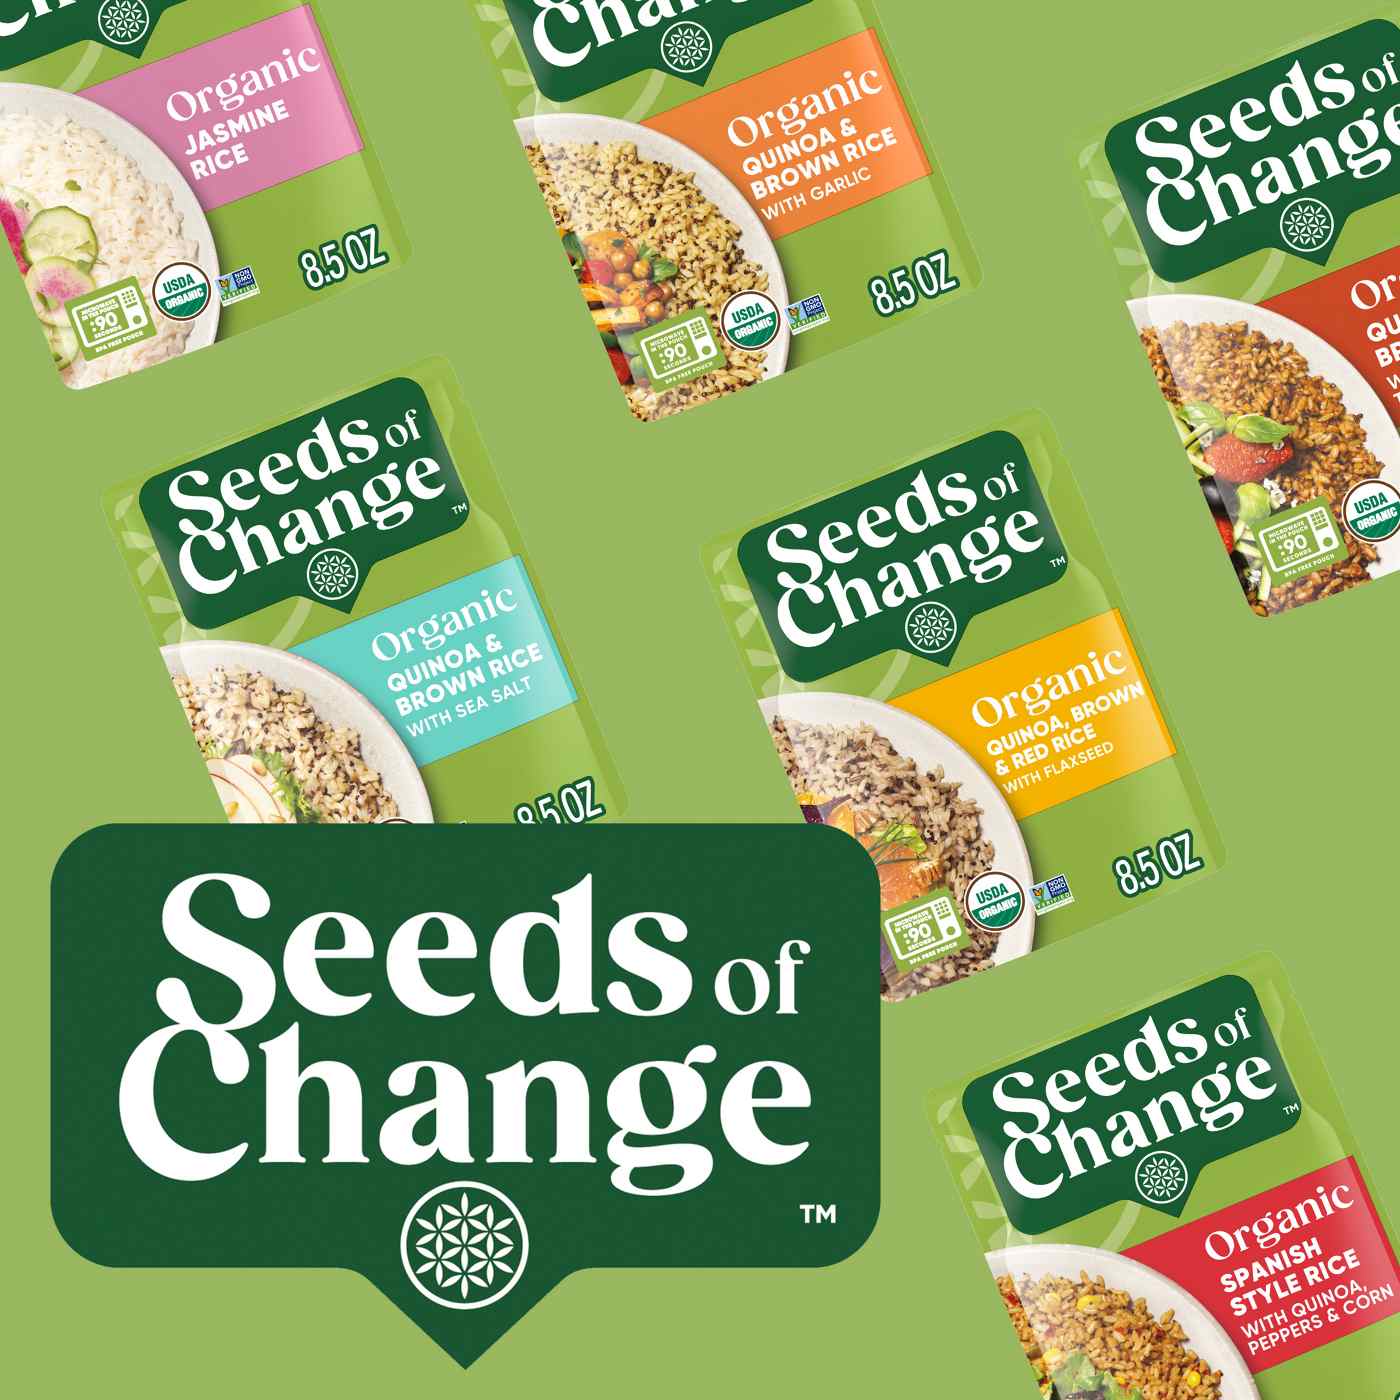 Seeds of Change Organic Quinoa & Brown Rice with Garlic; image 9 of 9